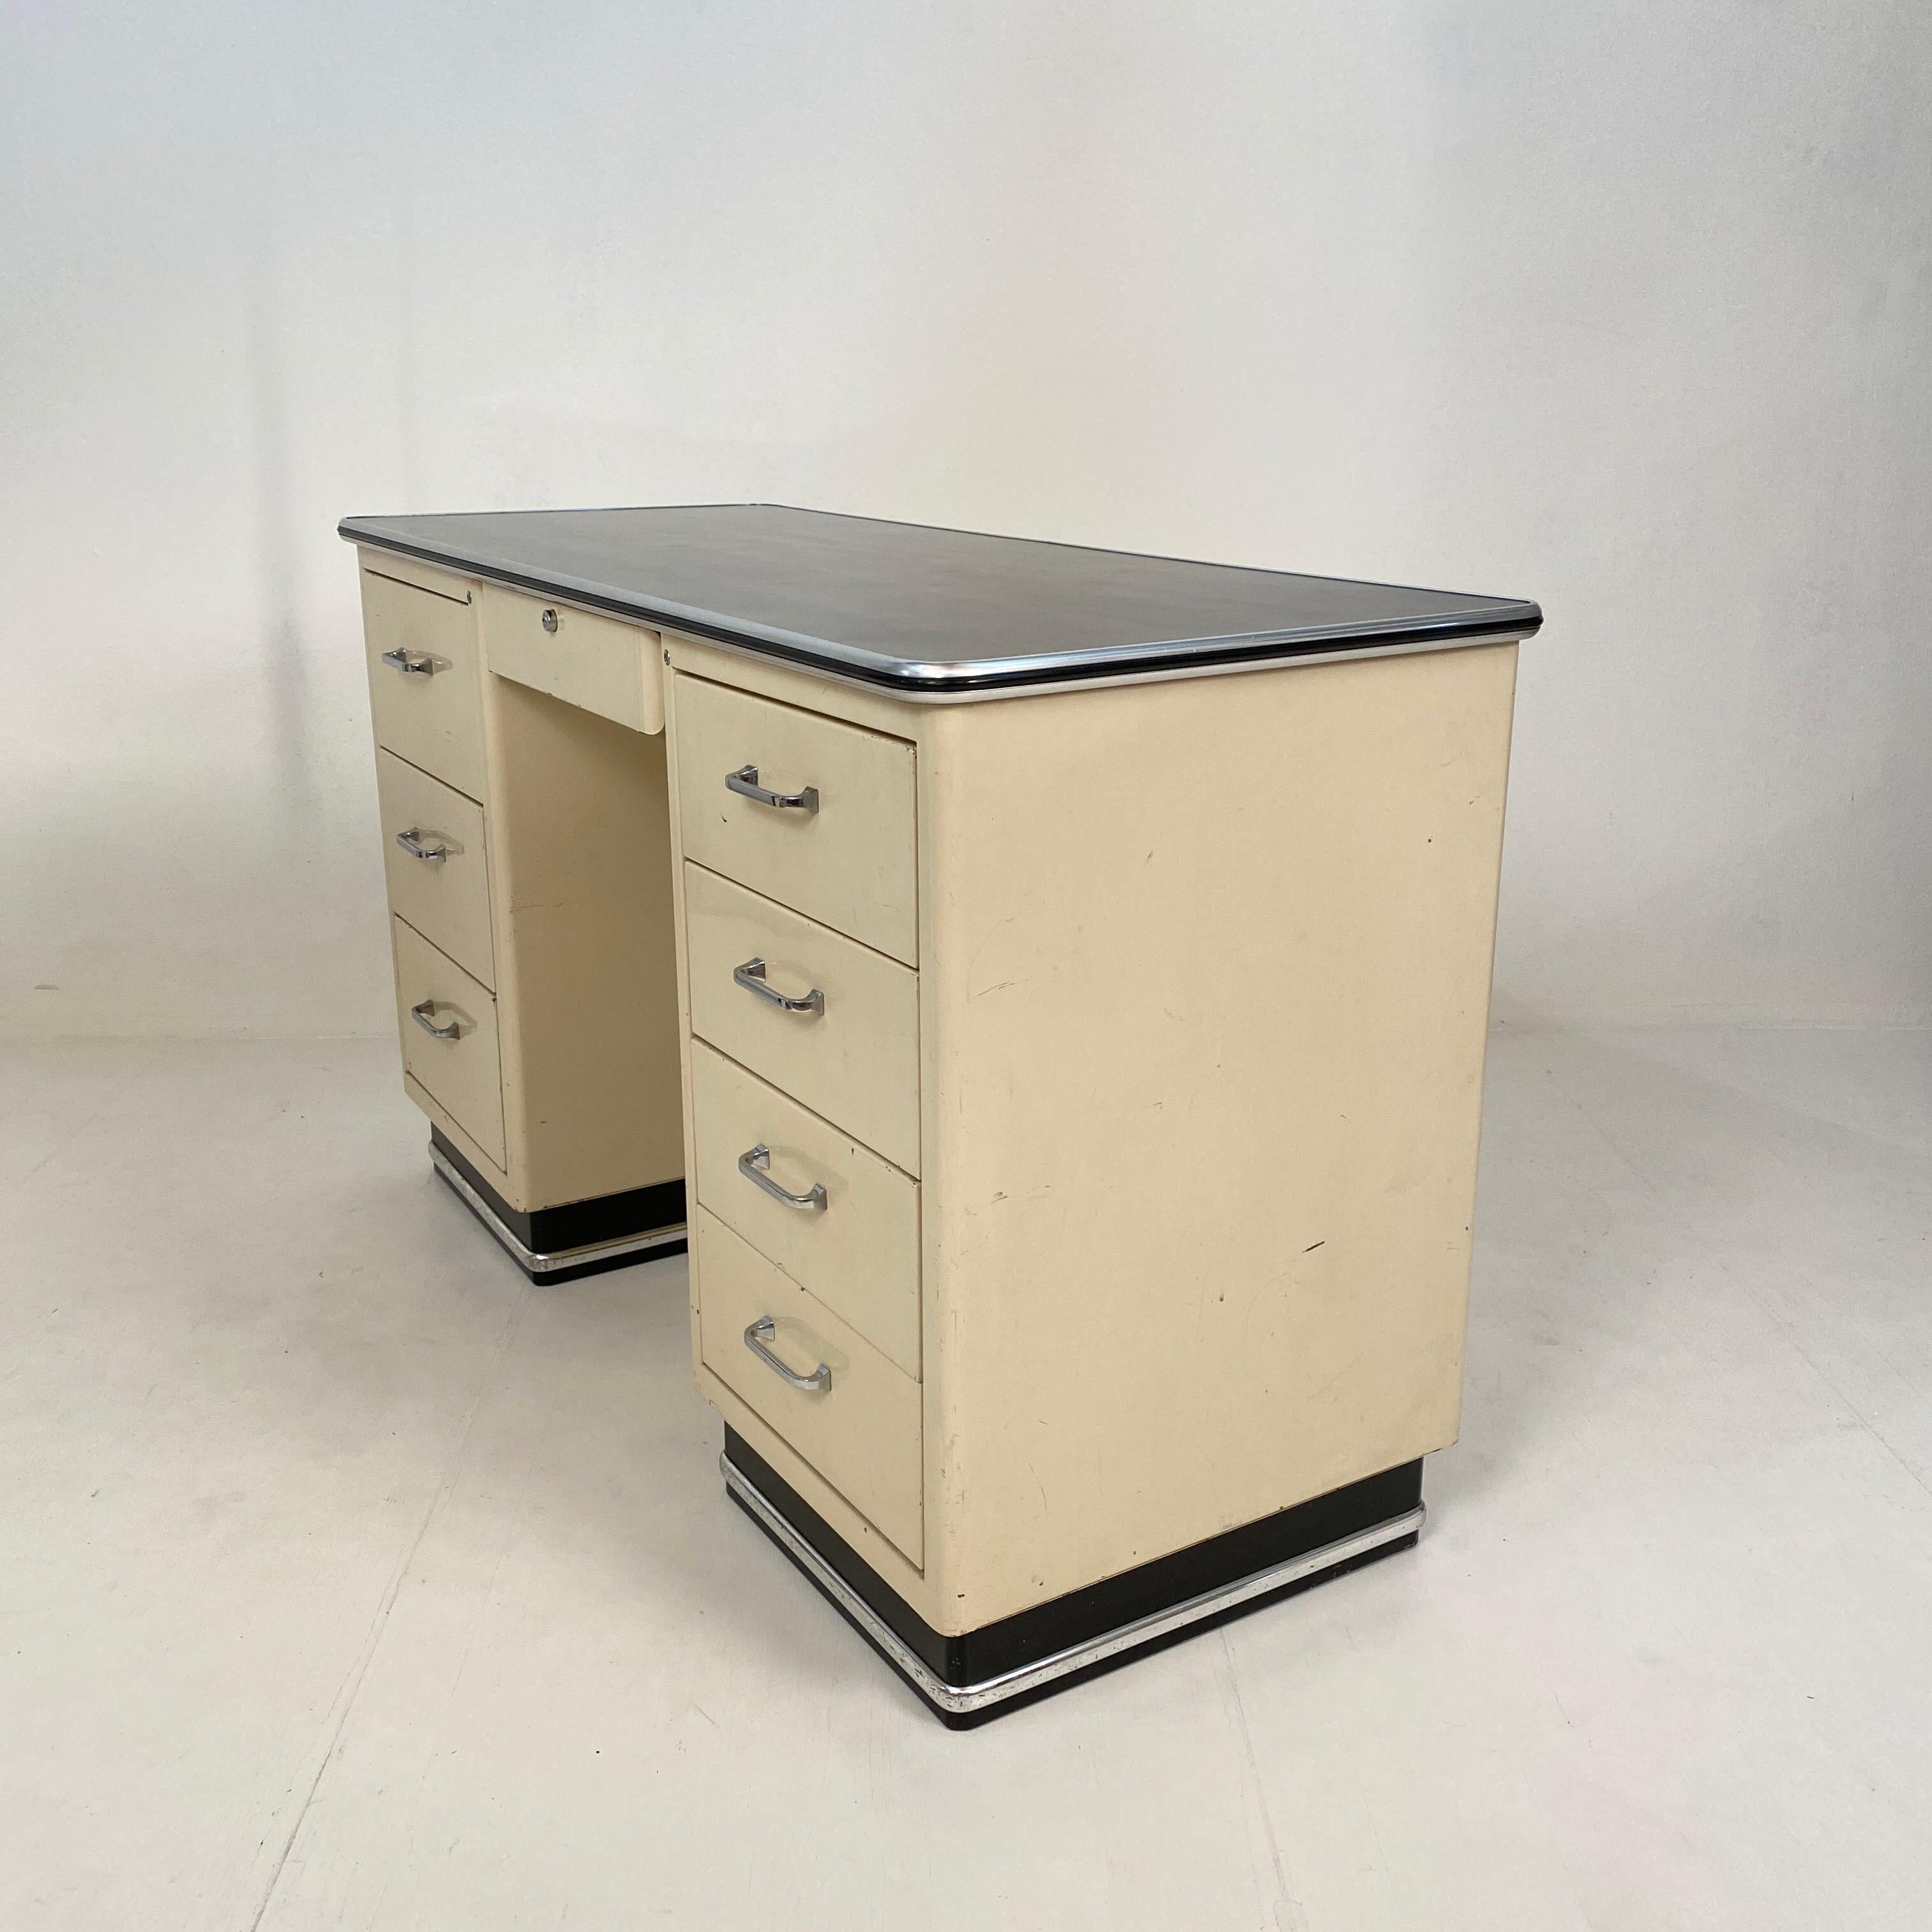 1930s German Bauhaus Desk Out of White Lacquered Metal and a Black Linoleum Top 1